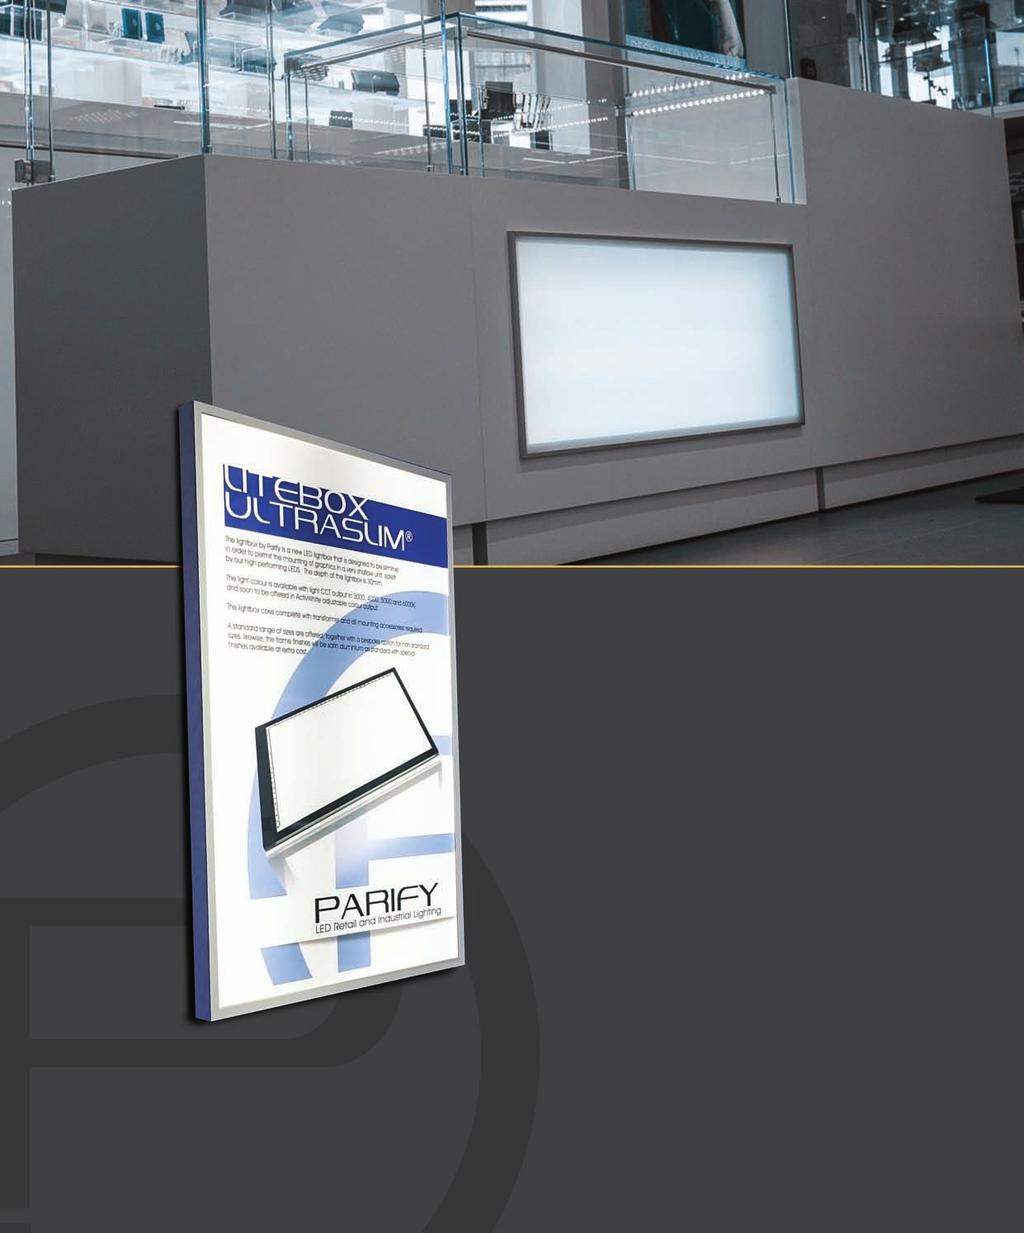 The lightbox by Parify is a new LED lightbox that is designed to be slimline in order to permit the mounting of graphics in a very shallow unit, side lit by our high performing LEDs.